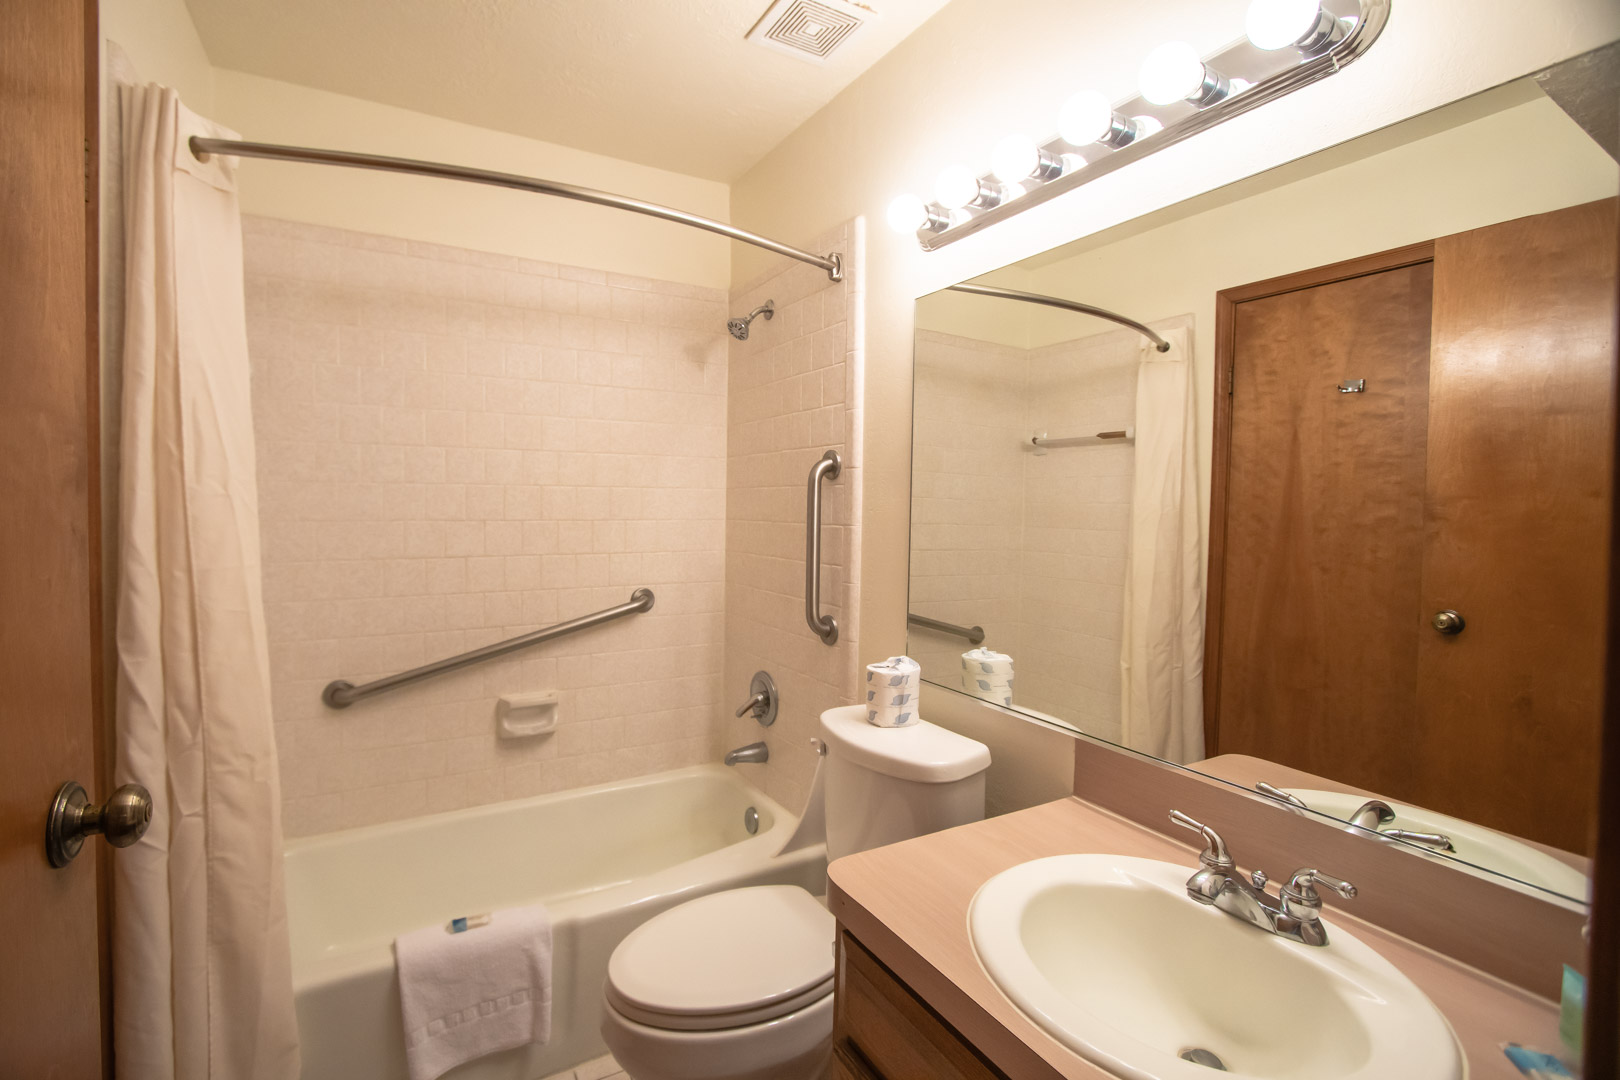 A clean bathroom at VRI's Sweetwater at Lake Conroe in Montgomery, TX.